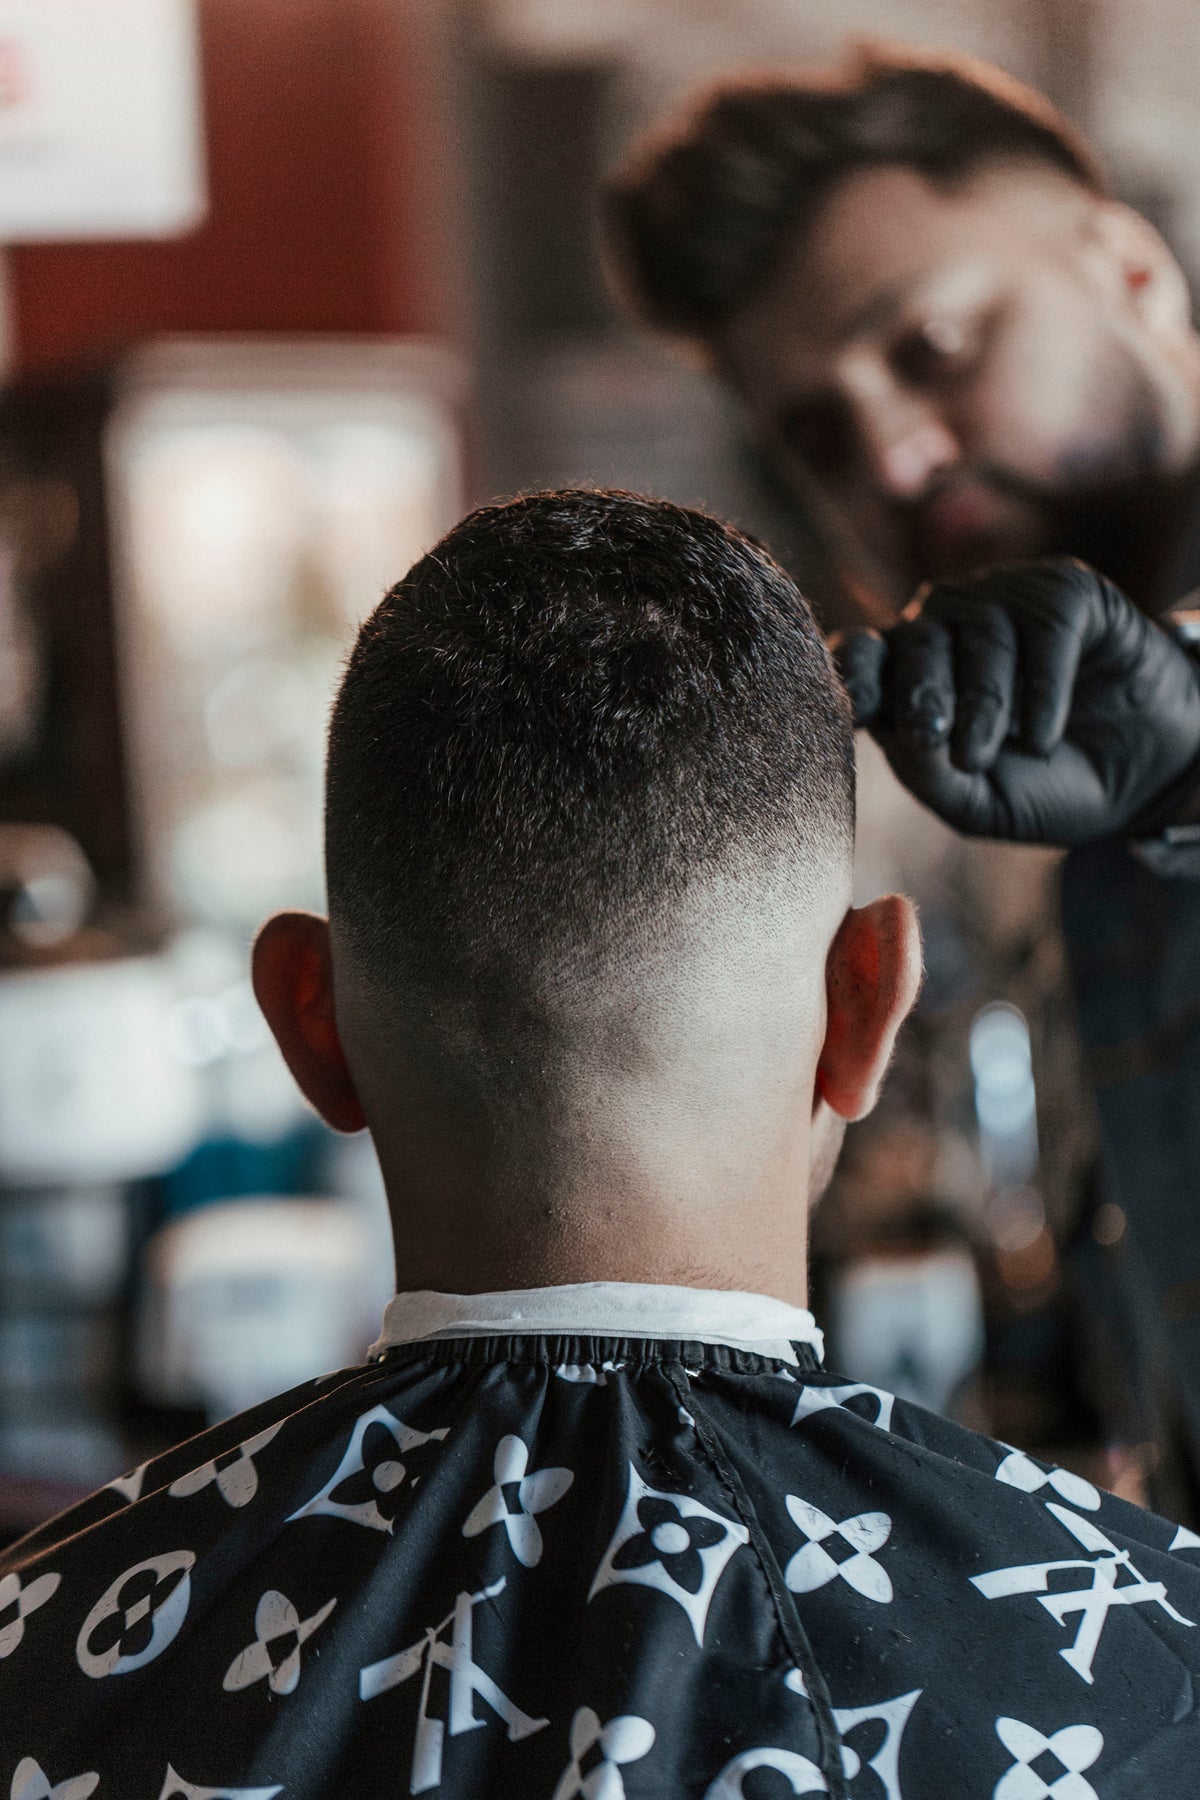 barber inspects his work of a clean haircut